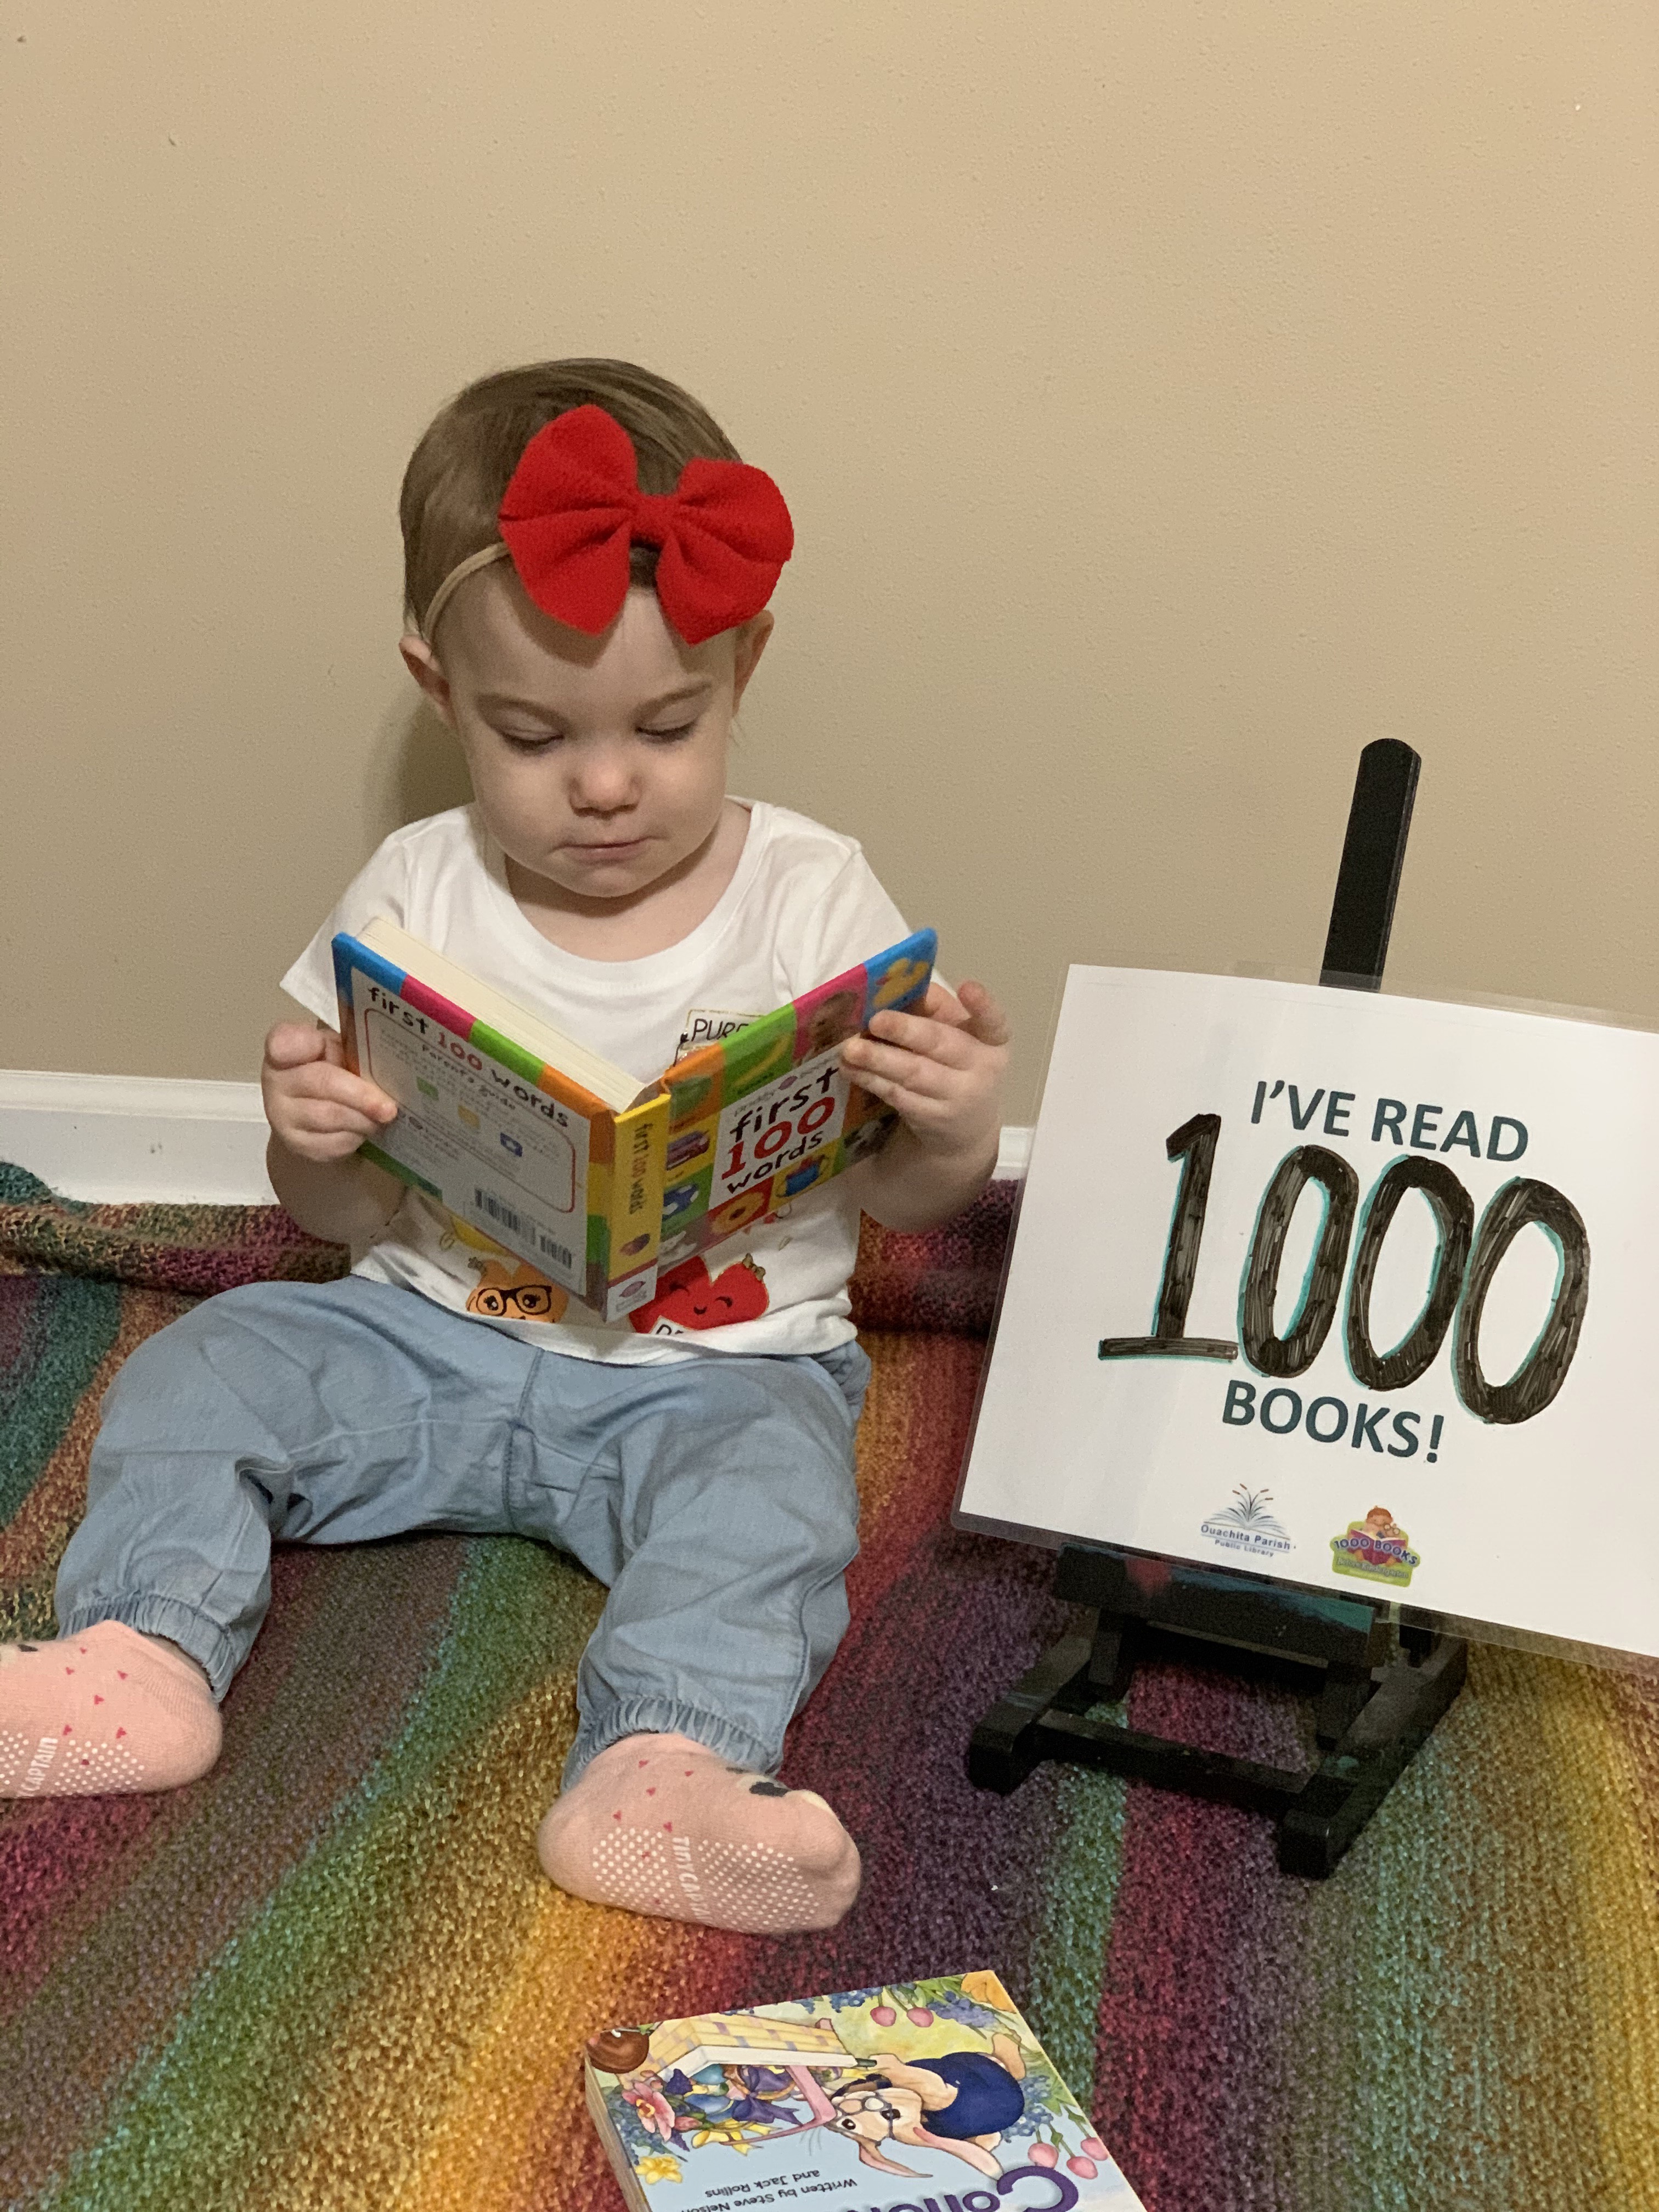 A baby sits up with a book open in her lap. There is a sign next to her that says, "I've read 1000 books!"